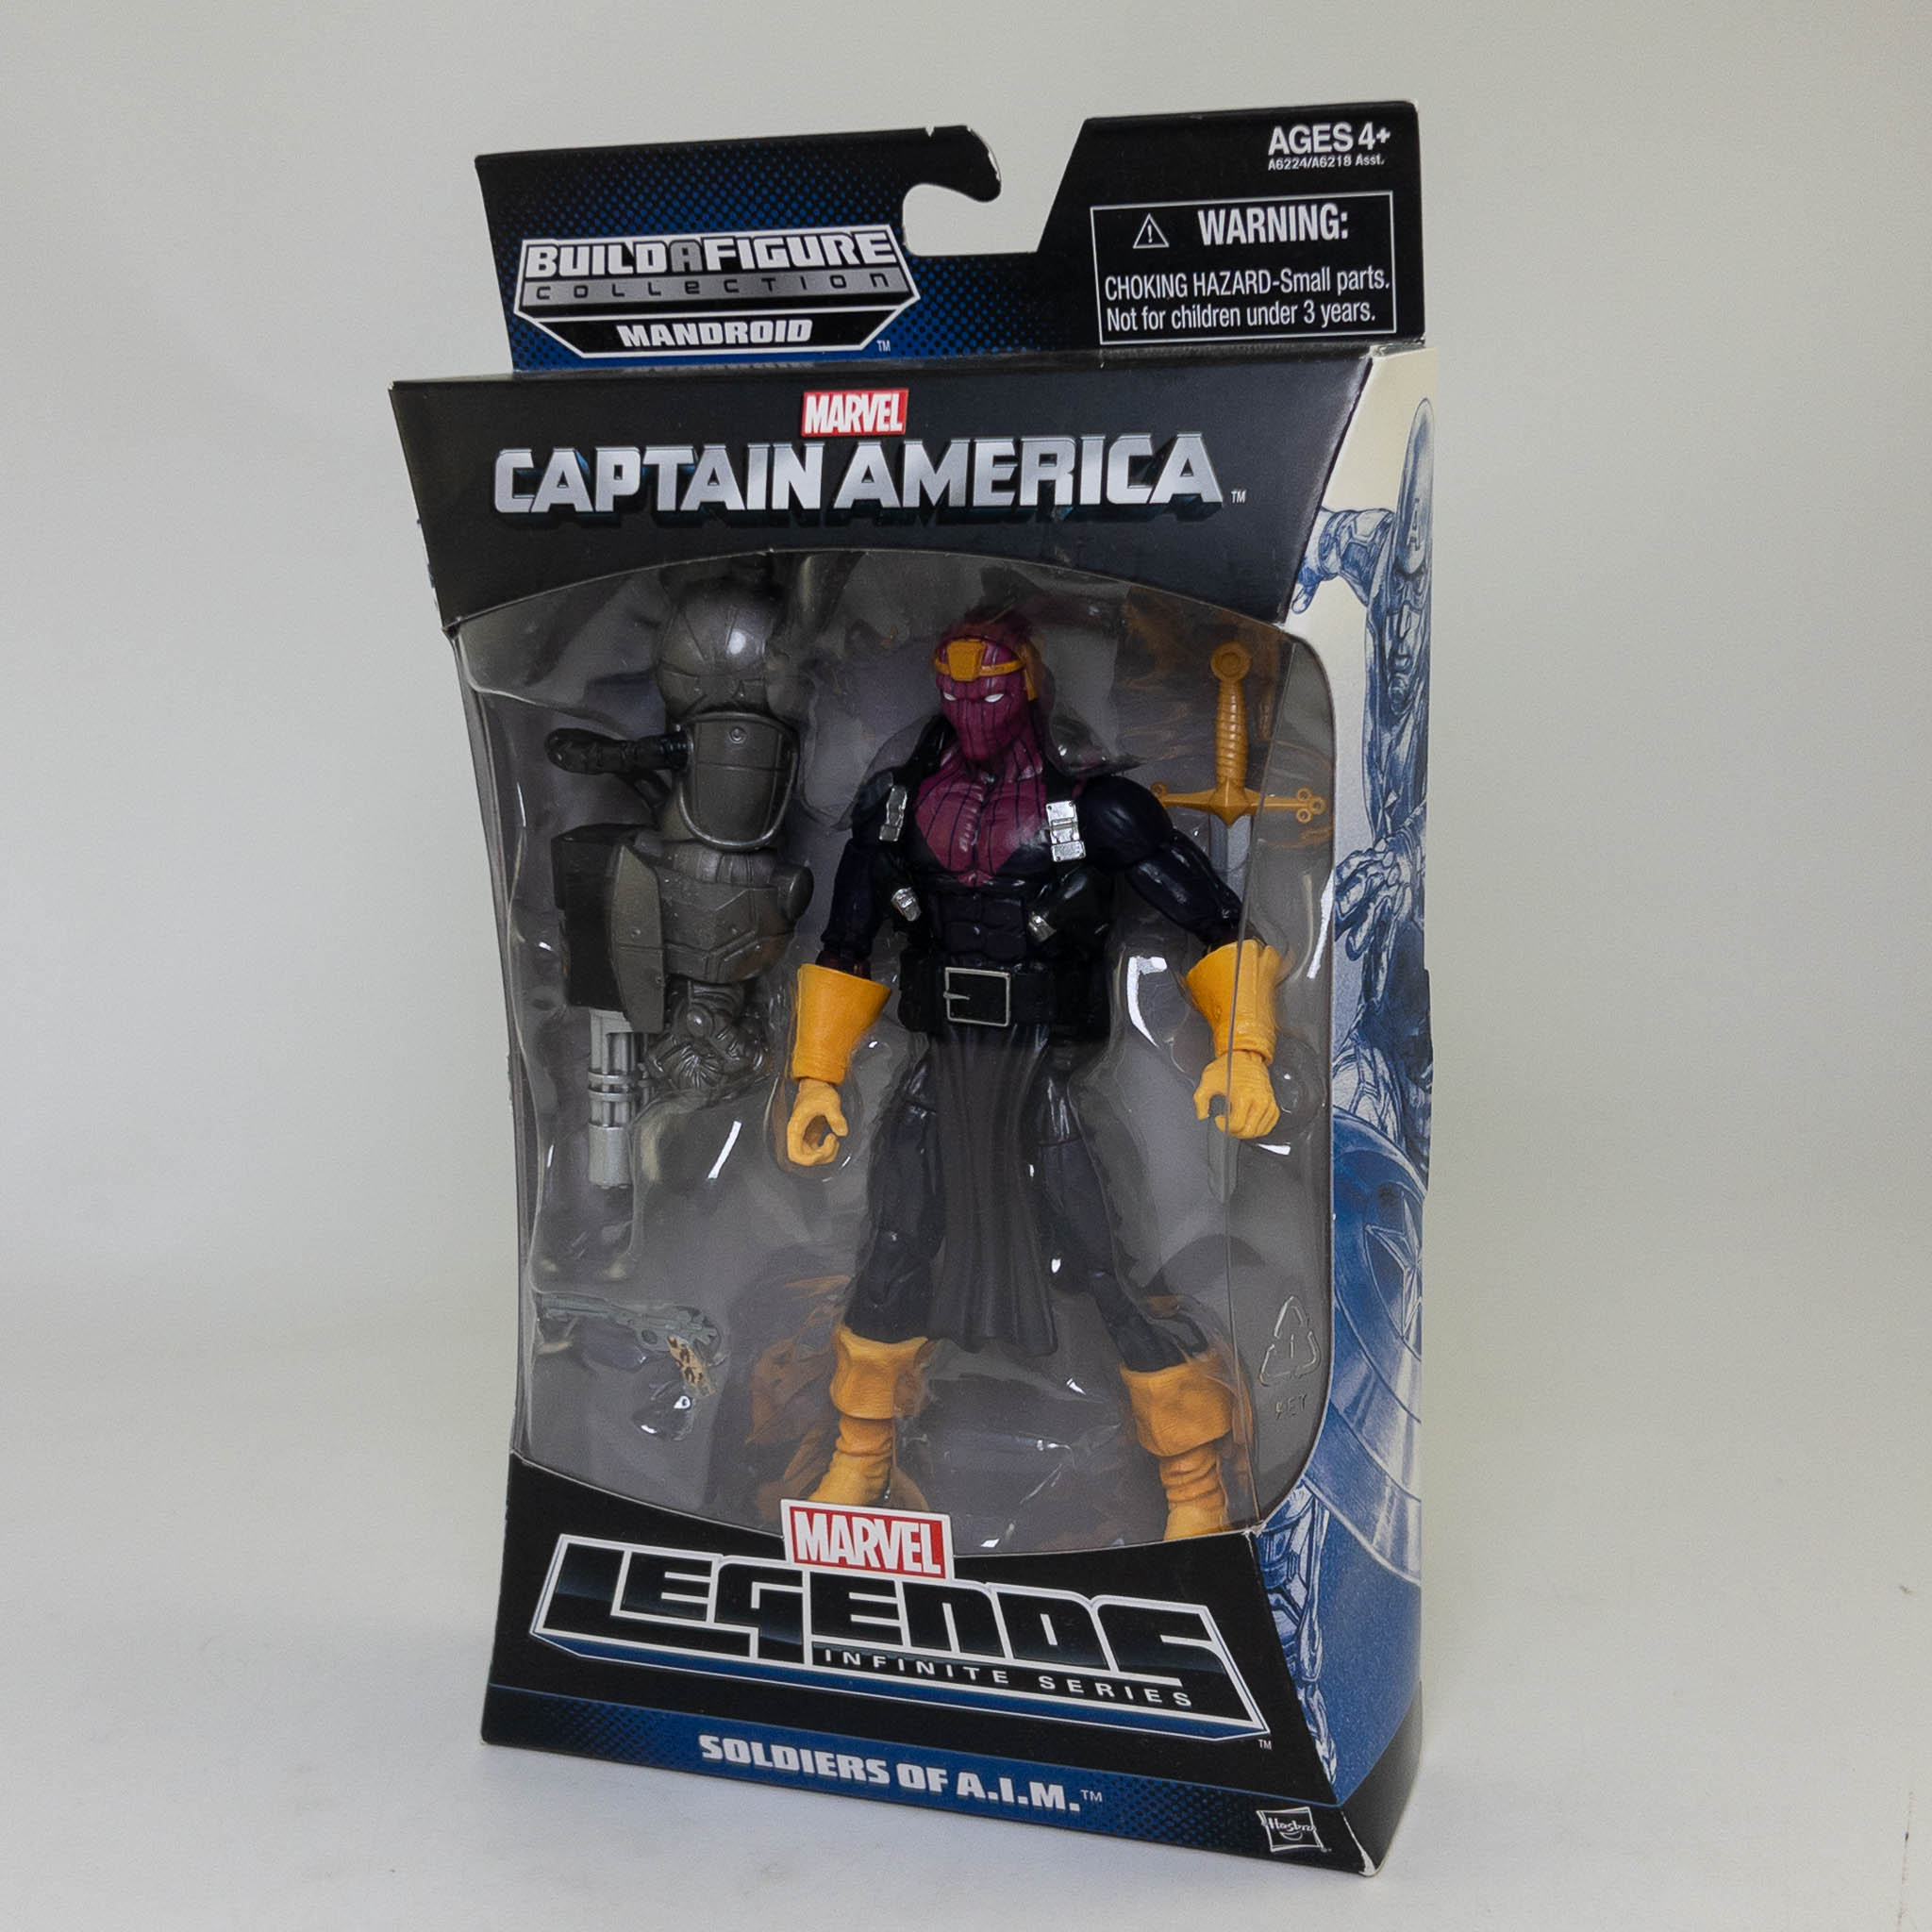 Marvel Legends - Build A Figure Mandroid - Soldiers of A.I.M. BARON ZEMO Action Figure *NM BOX*